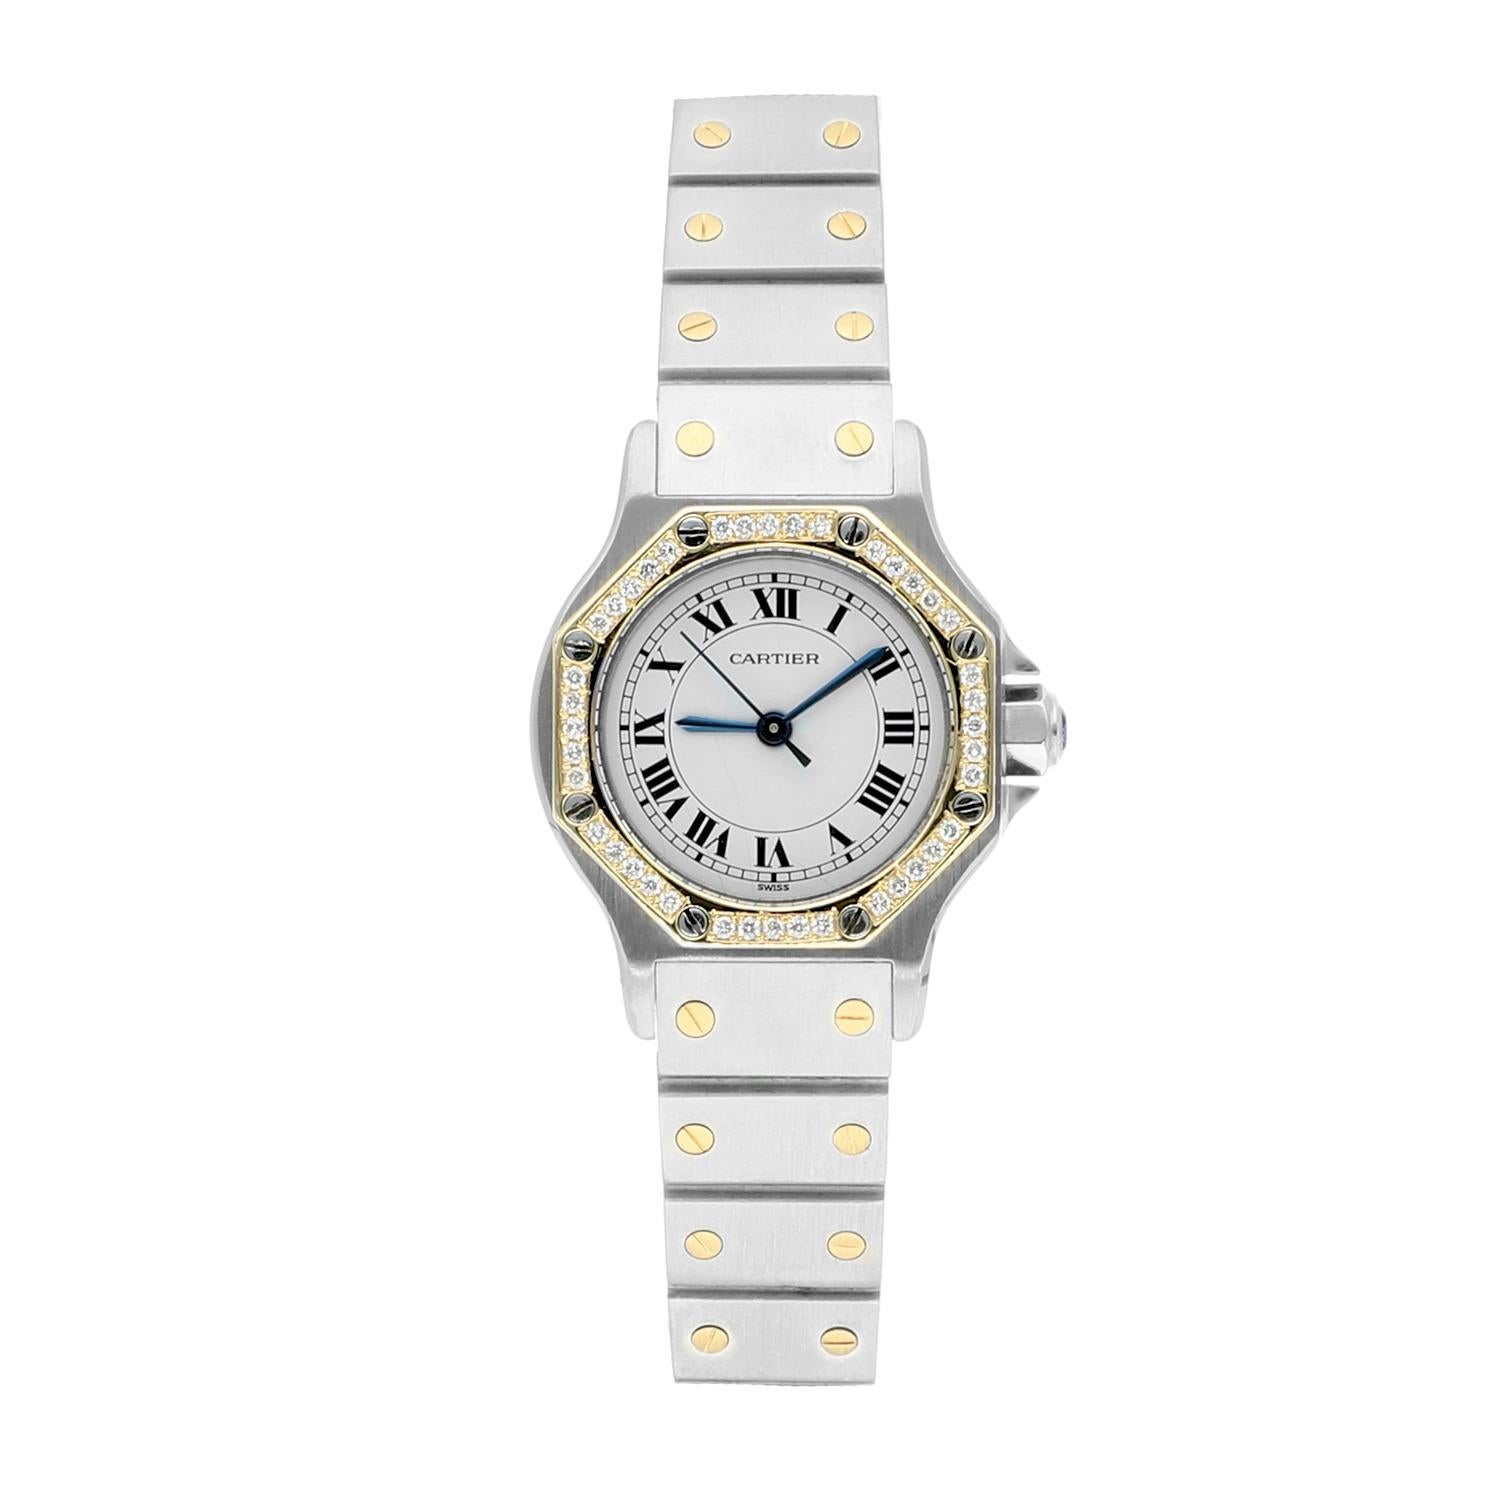 Cartier Santos Octagon 24mm Women's Watch with Diamond Bezel 187903
This watch has been professionally polished, serviced and is in excellent overall condition. There are absolutely no visible scratches or blemishes. Diamonds were custom set, 100%